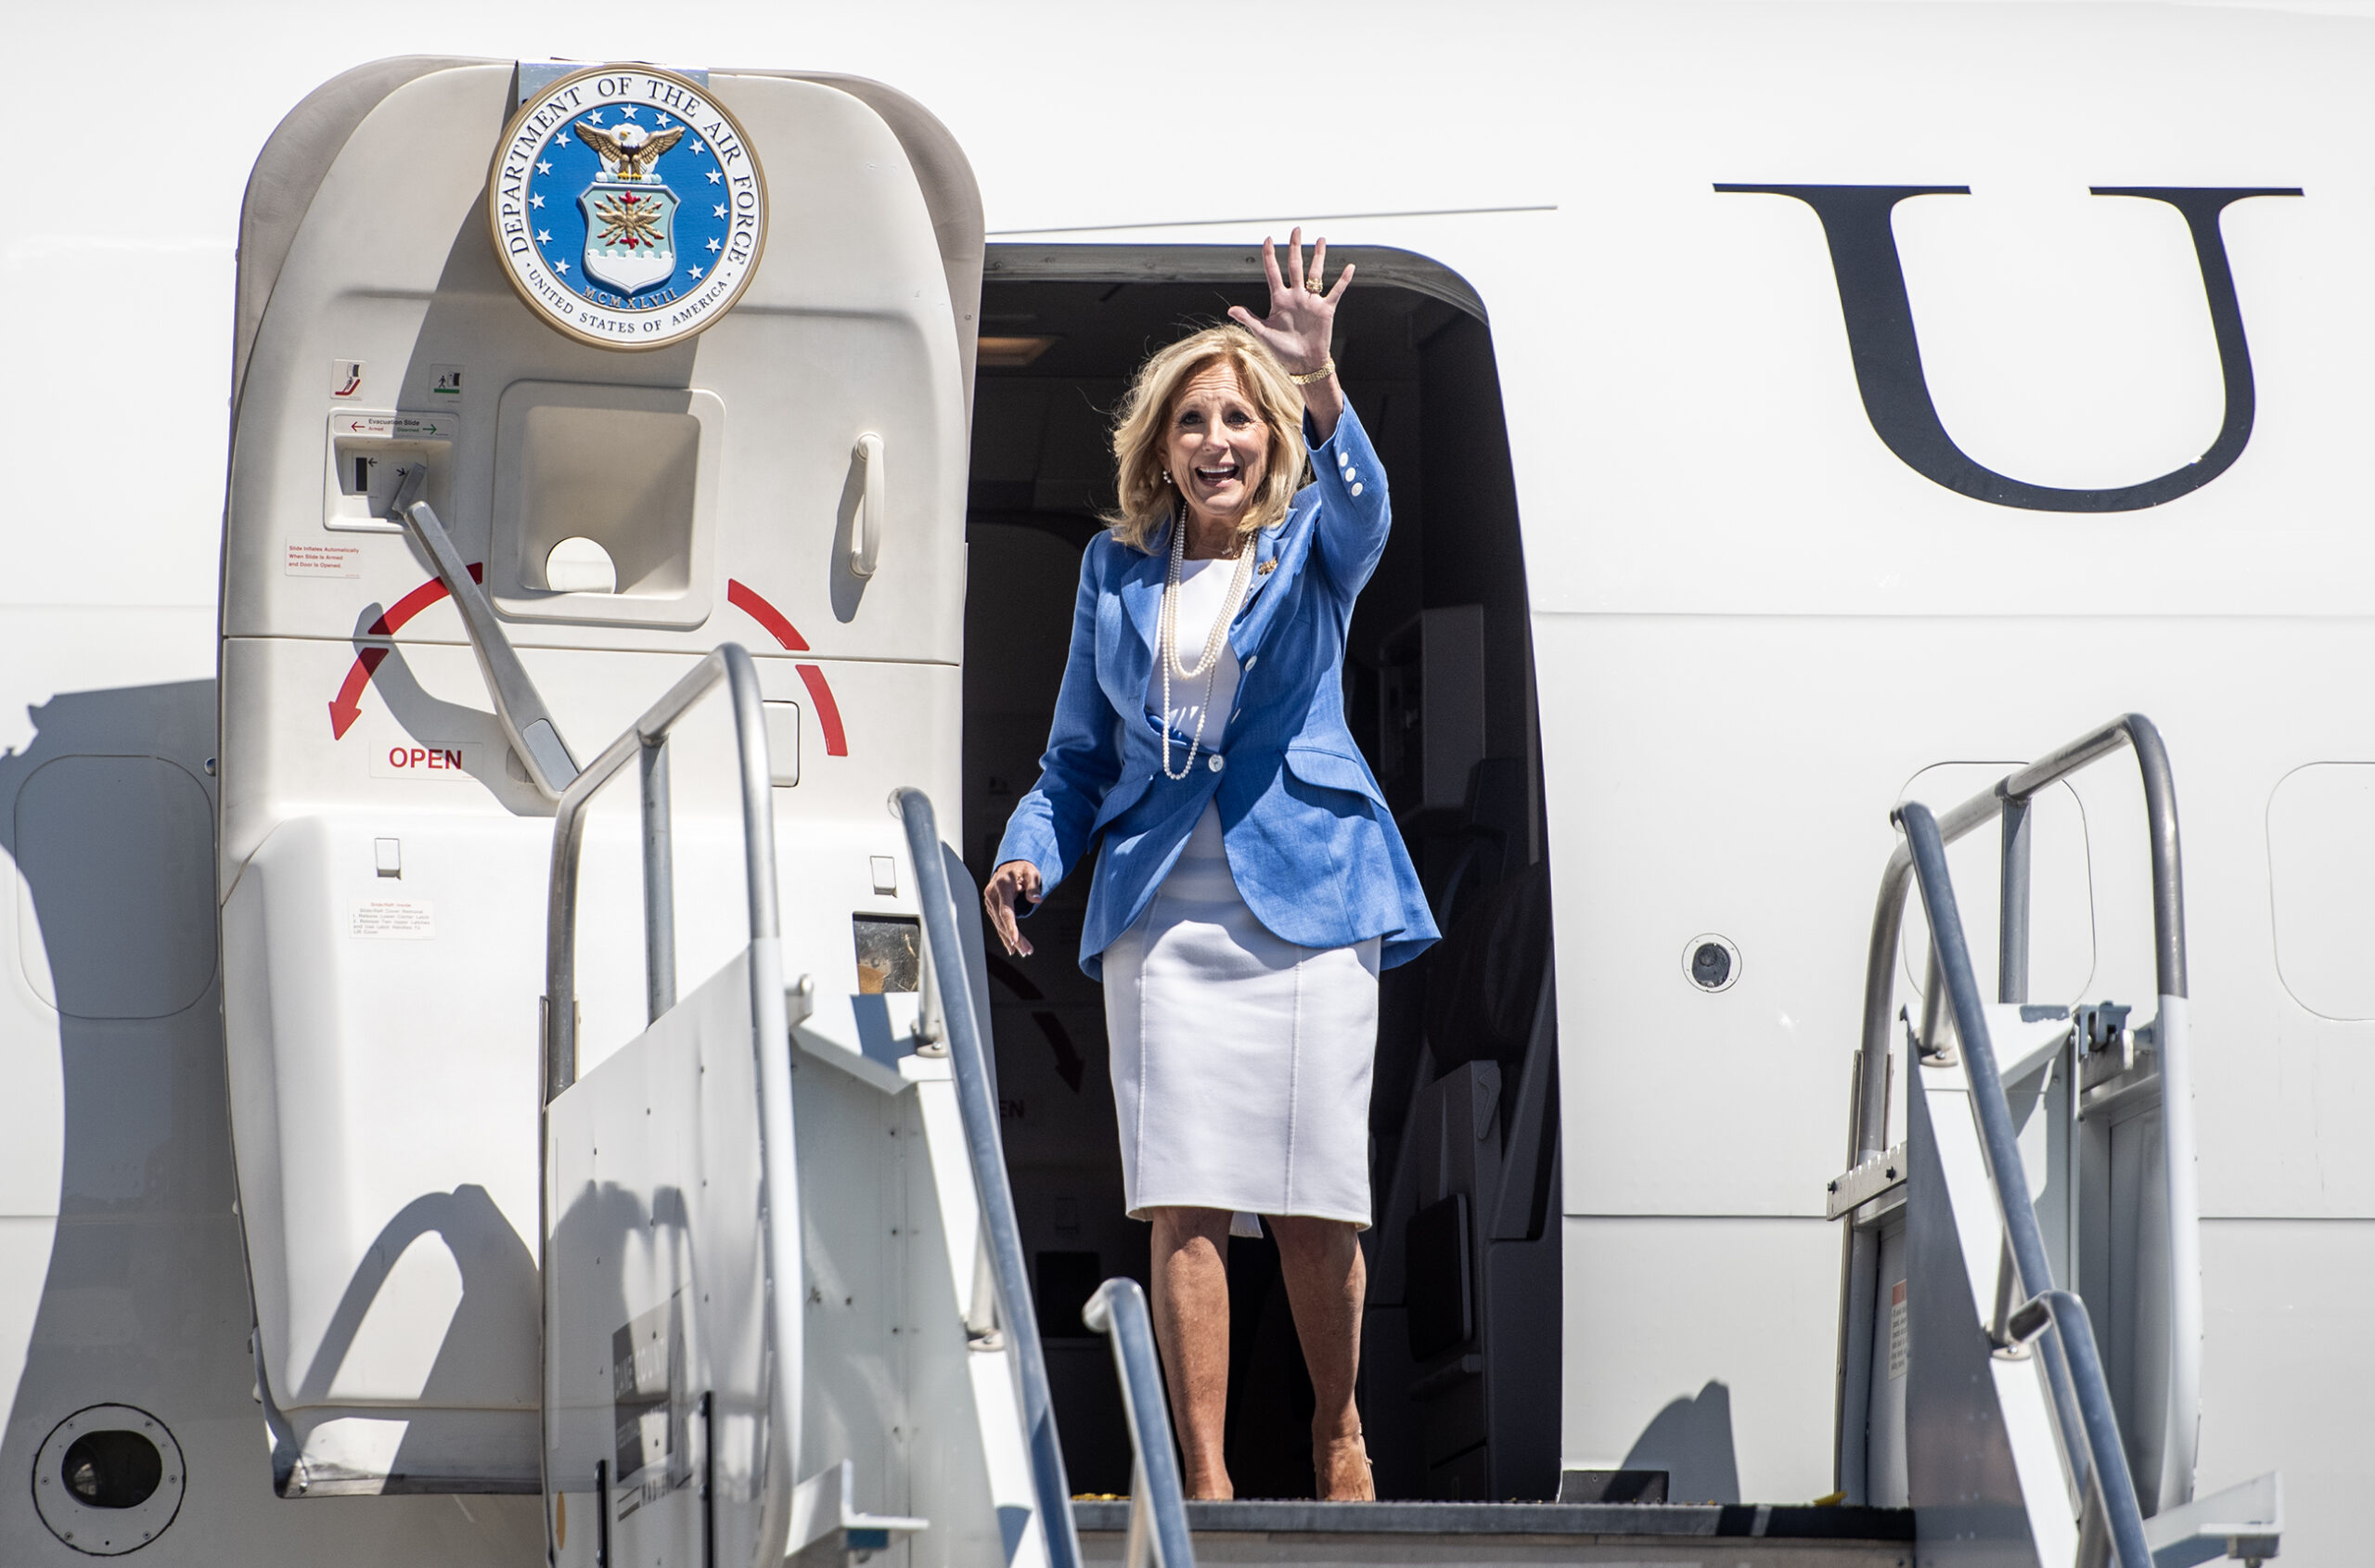 Jill Biden waves as she steps out of her plane.